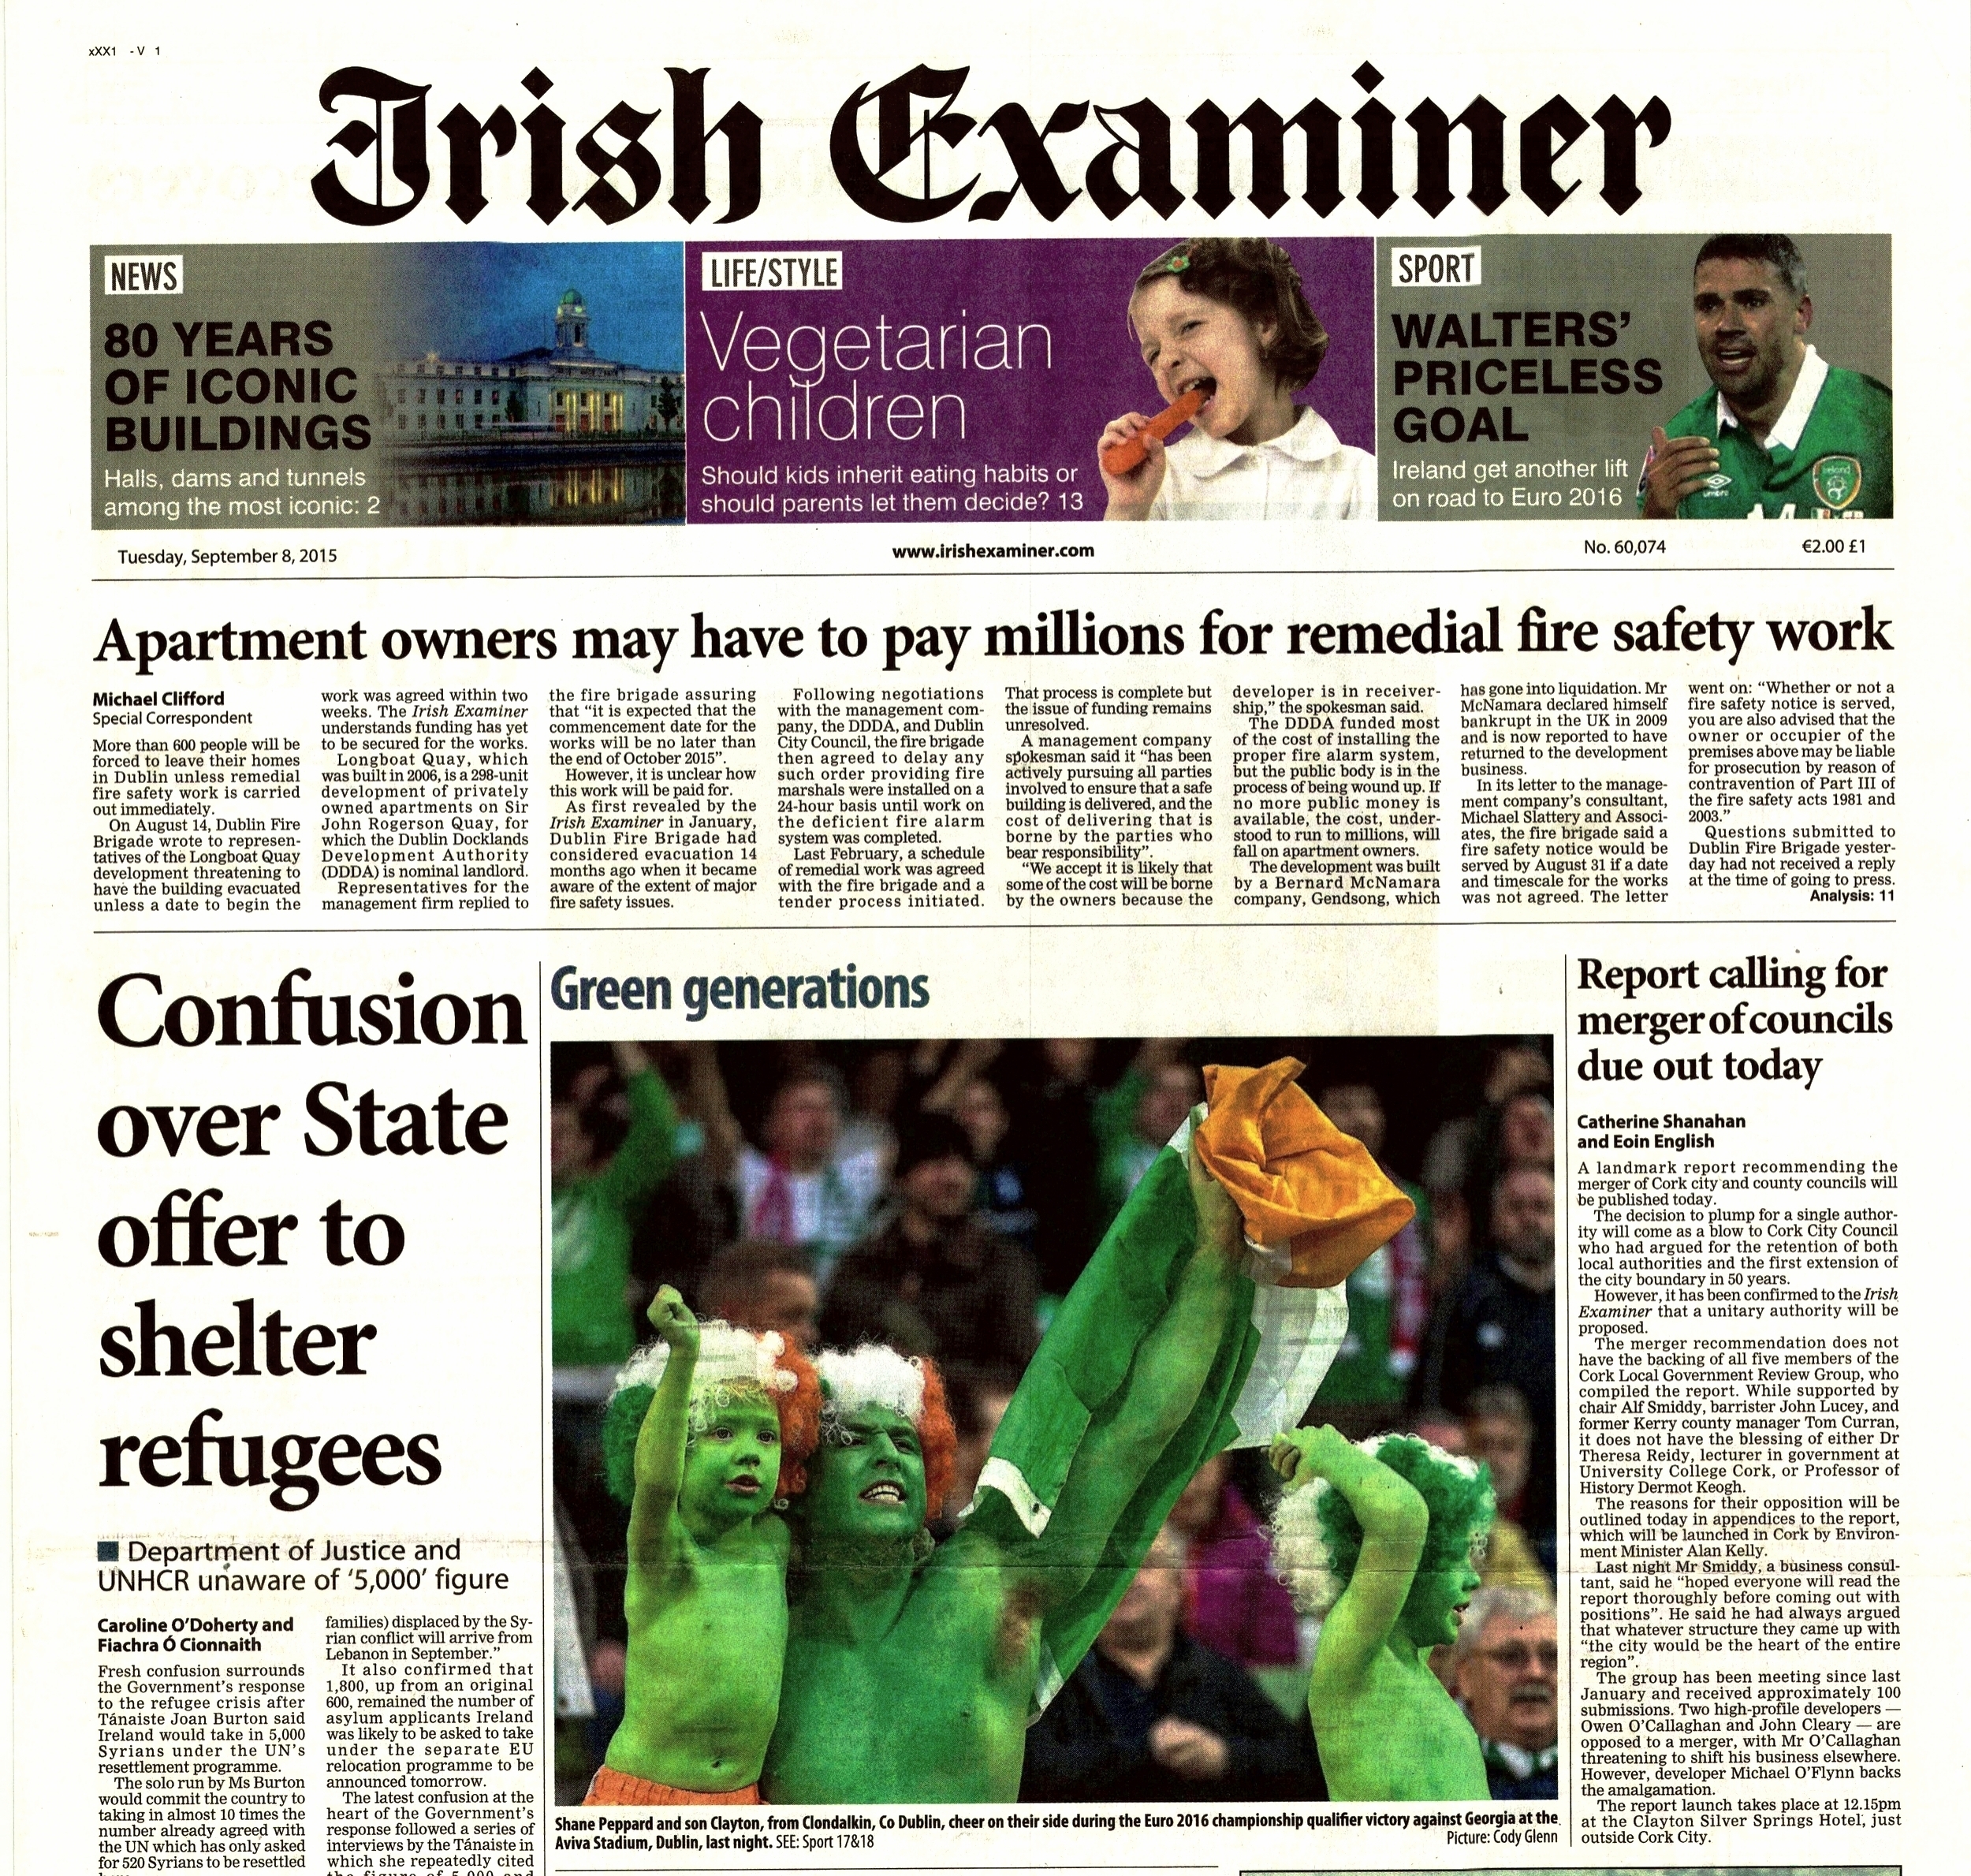  Republic of Ireland supporters cheer on their side during a victory against Georgia in the EURO Qualifiers September 8 2015  / Irish Examiner  